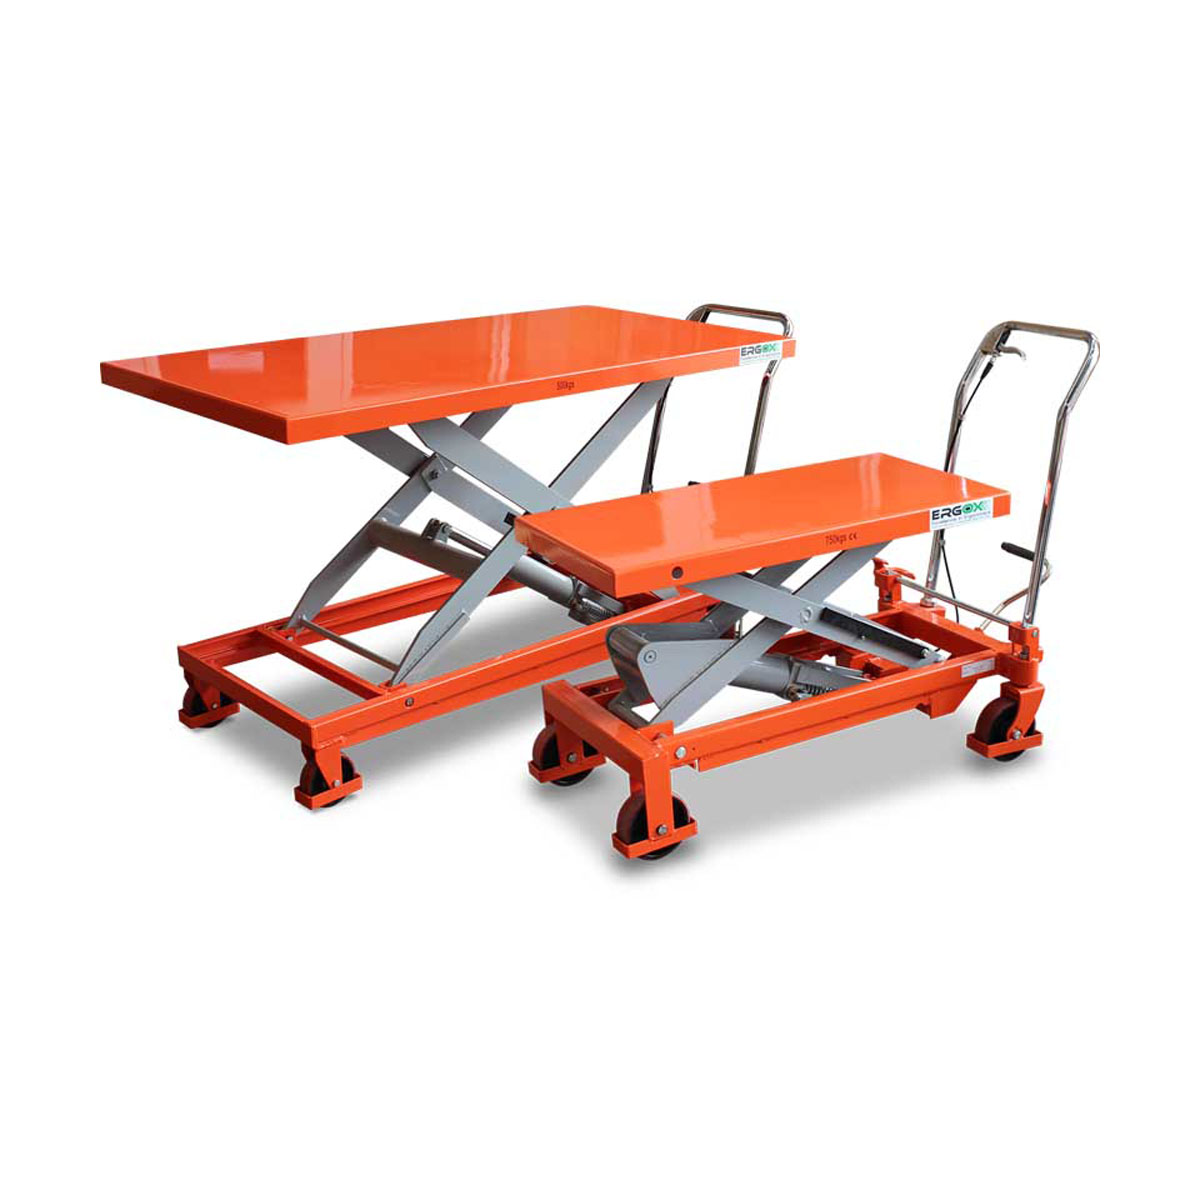 Buy Mobile Scissor Lift Trolley  in Mobile Lift Tables from Astrolift NZ